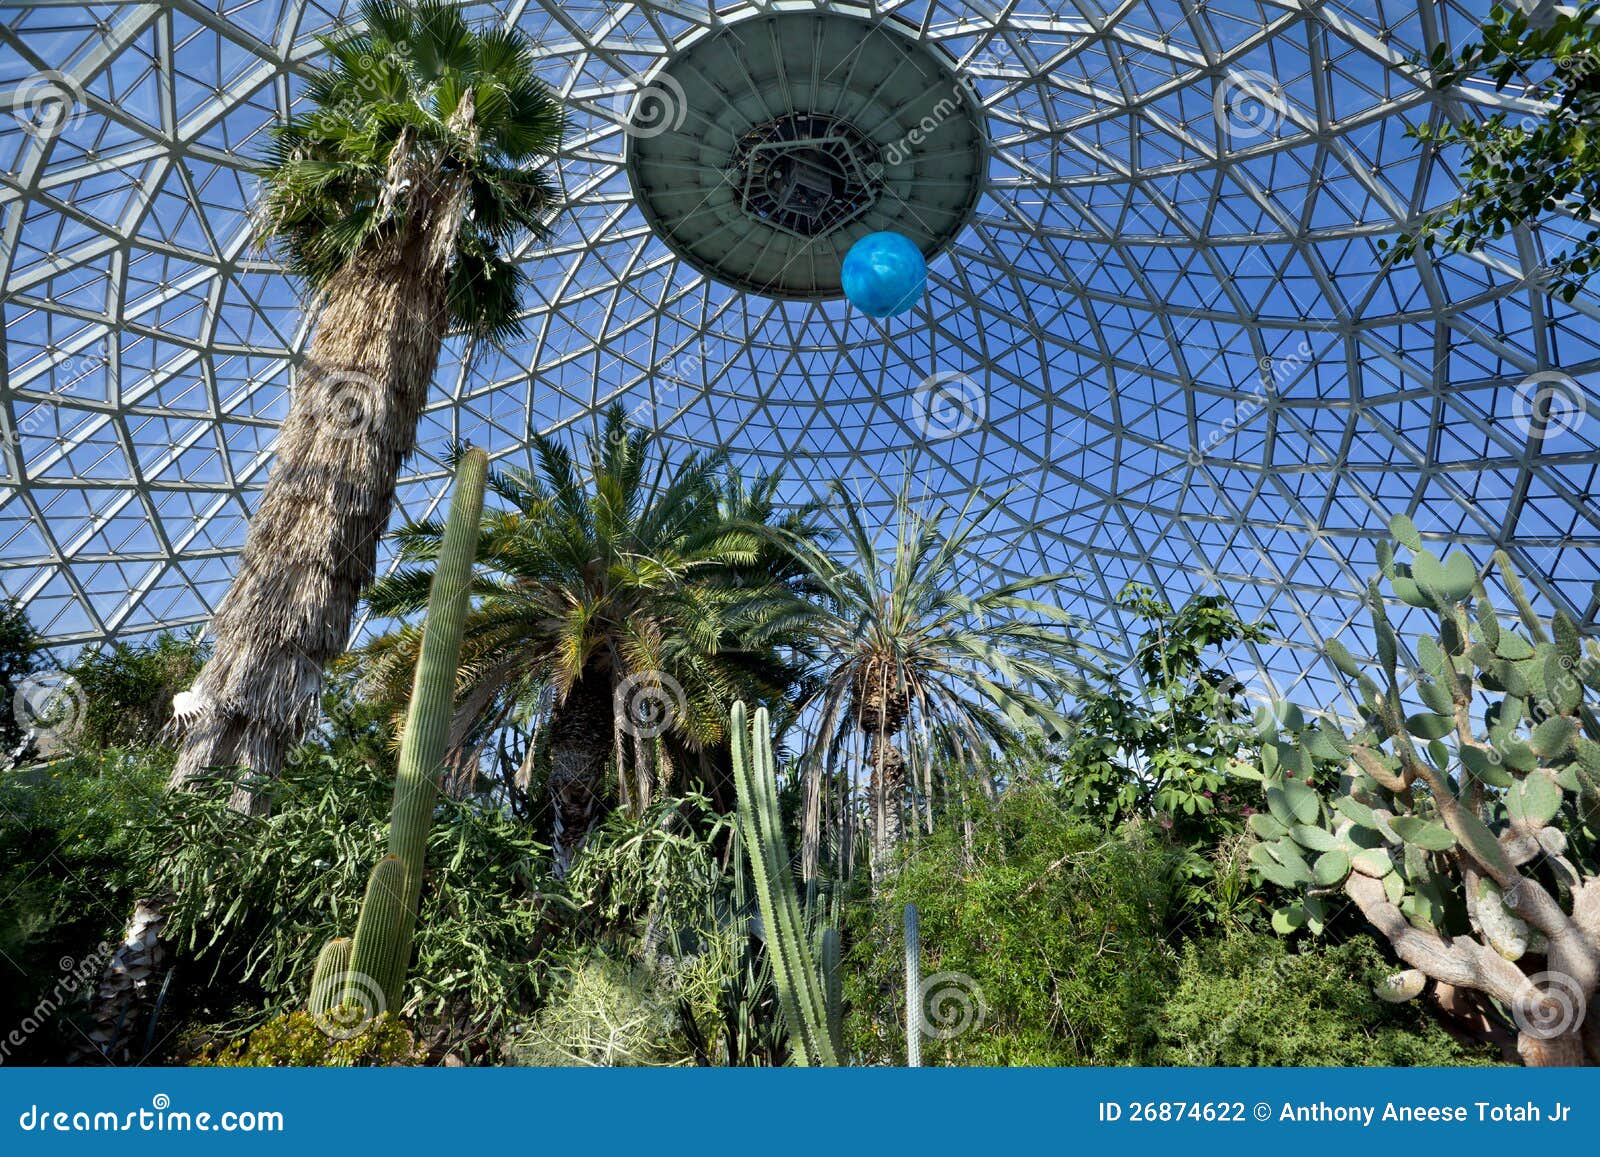 Tropical greenhouse with a geodesic dome glass greenhouse roof filled 